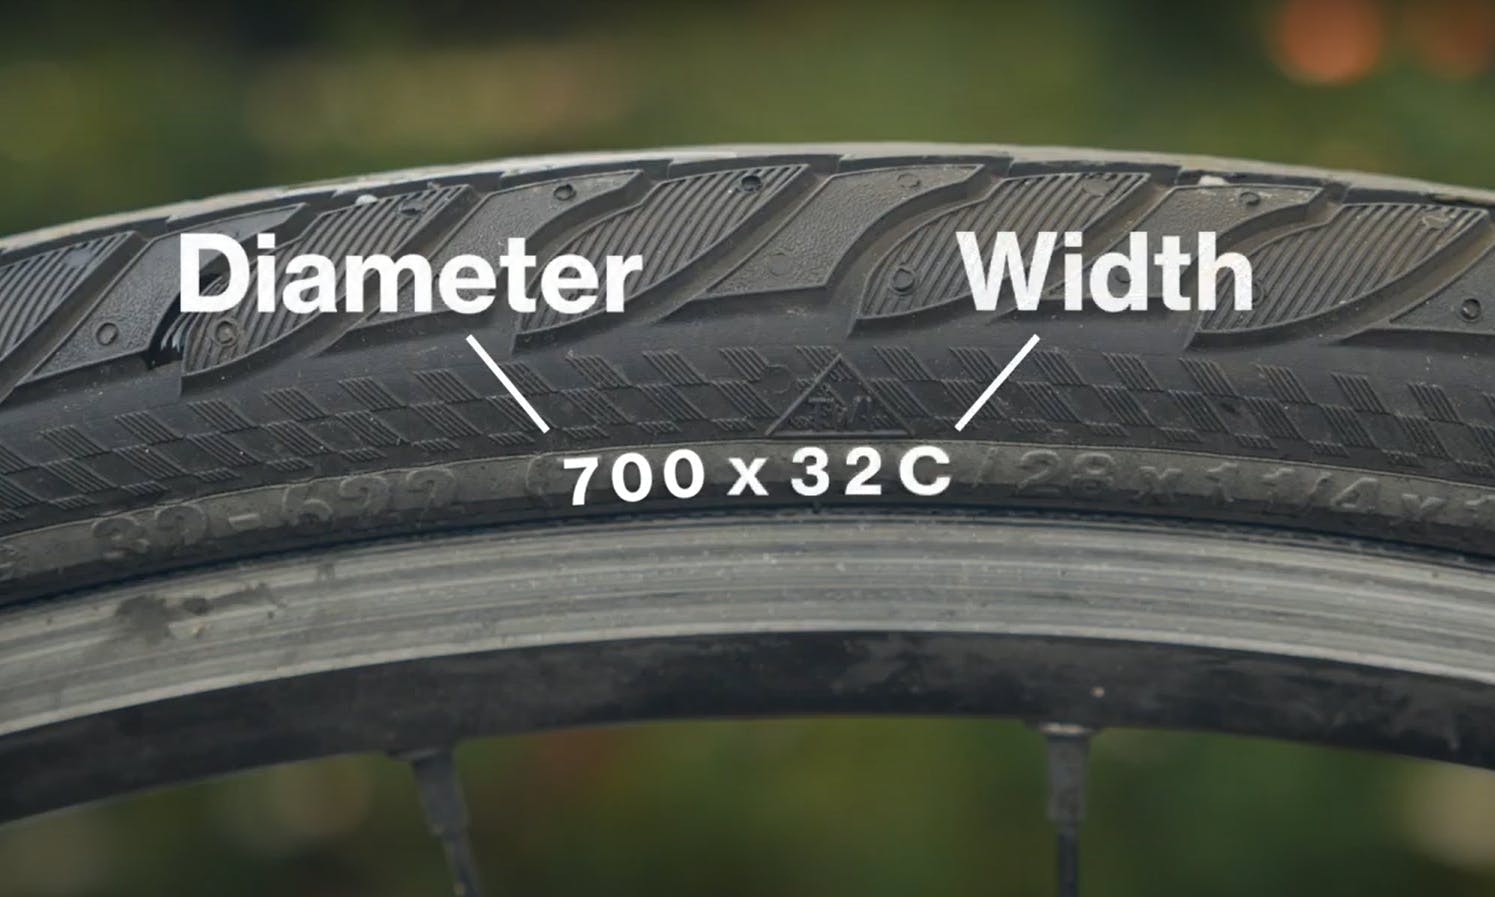 Close up of bike tire showing the diameter and width measurements on the side of the tire